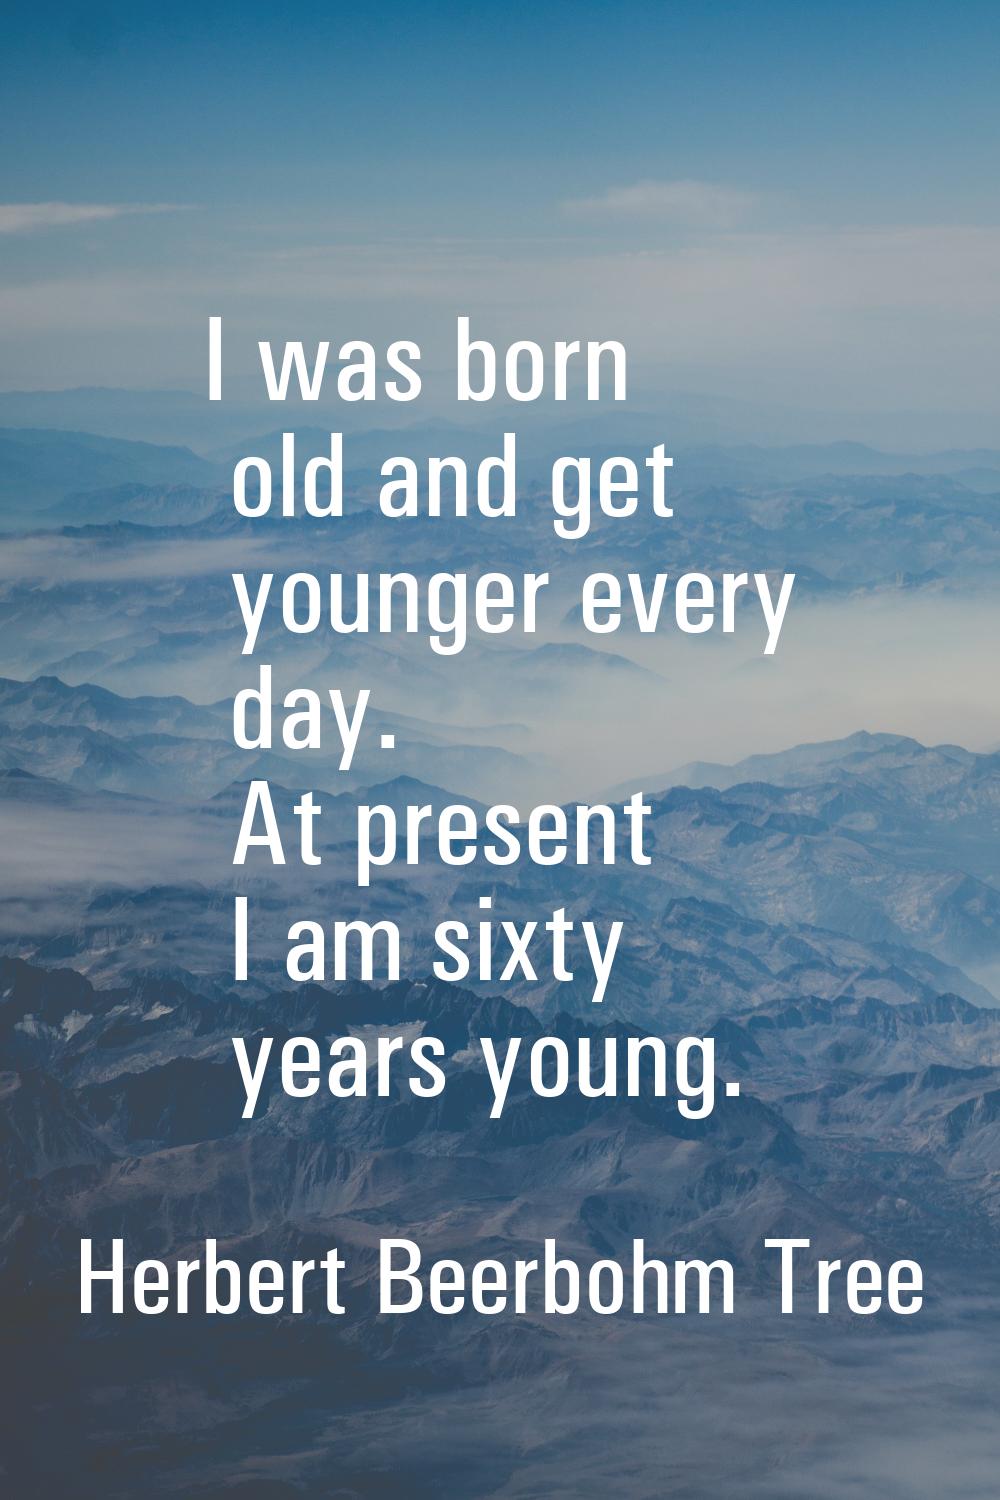 I was born old and get younger every day. At present I am sixty years young.